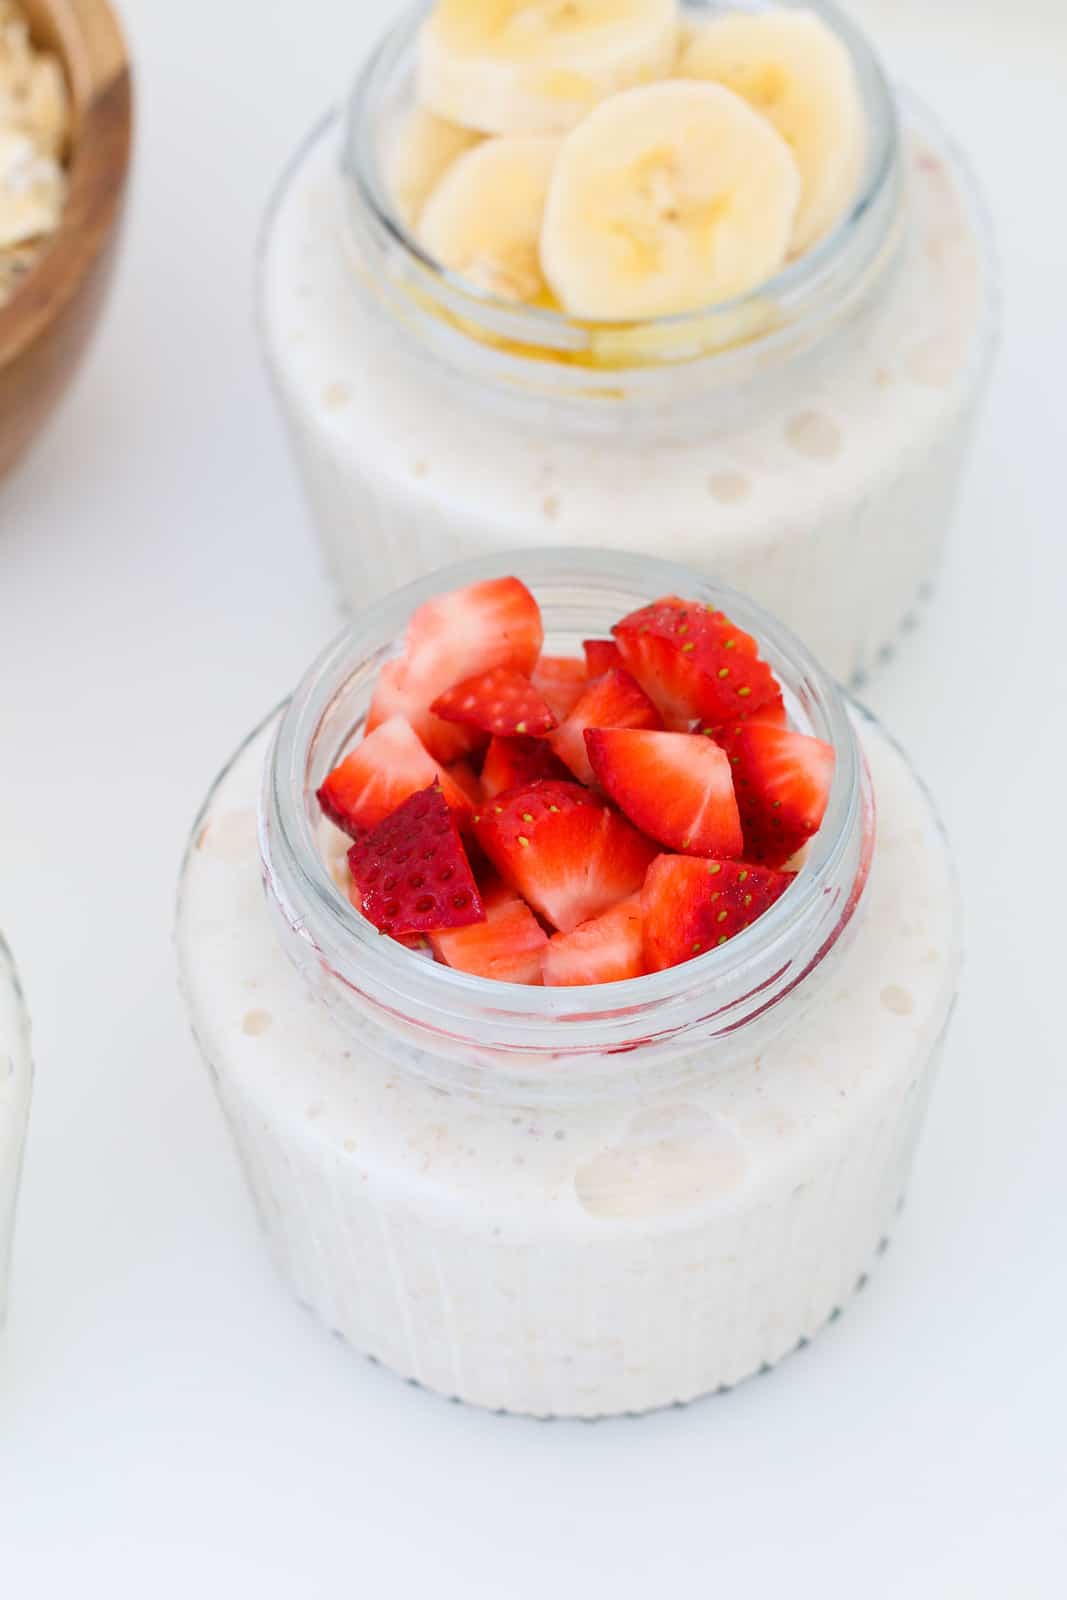 Strawberries on top of a small glass jar filled with bircher muesli.